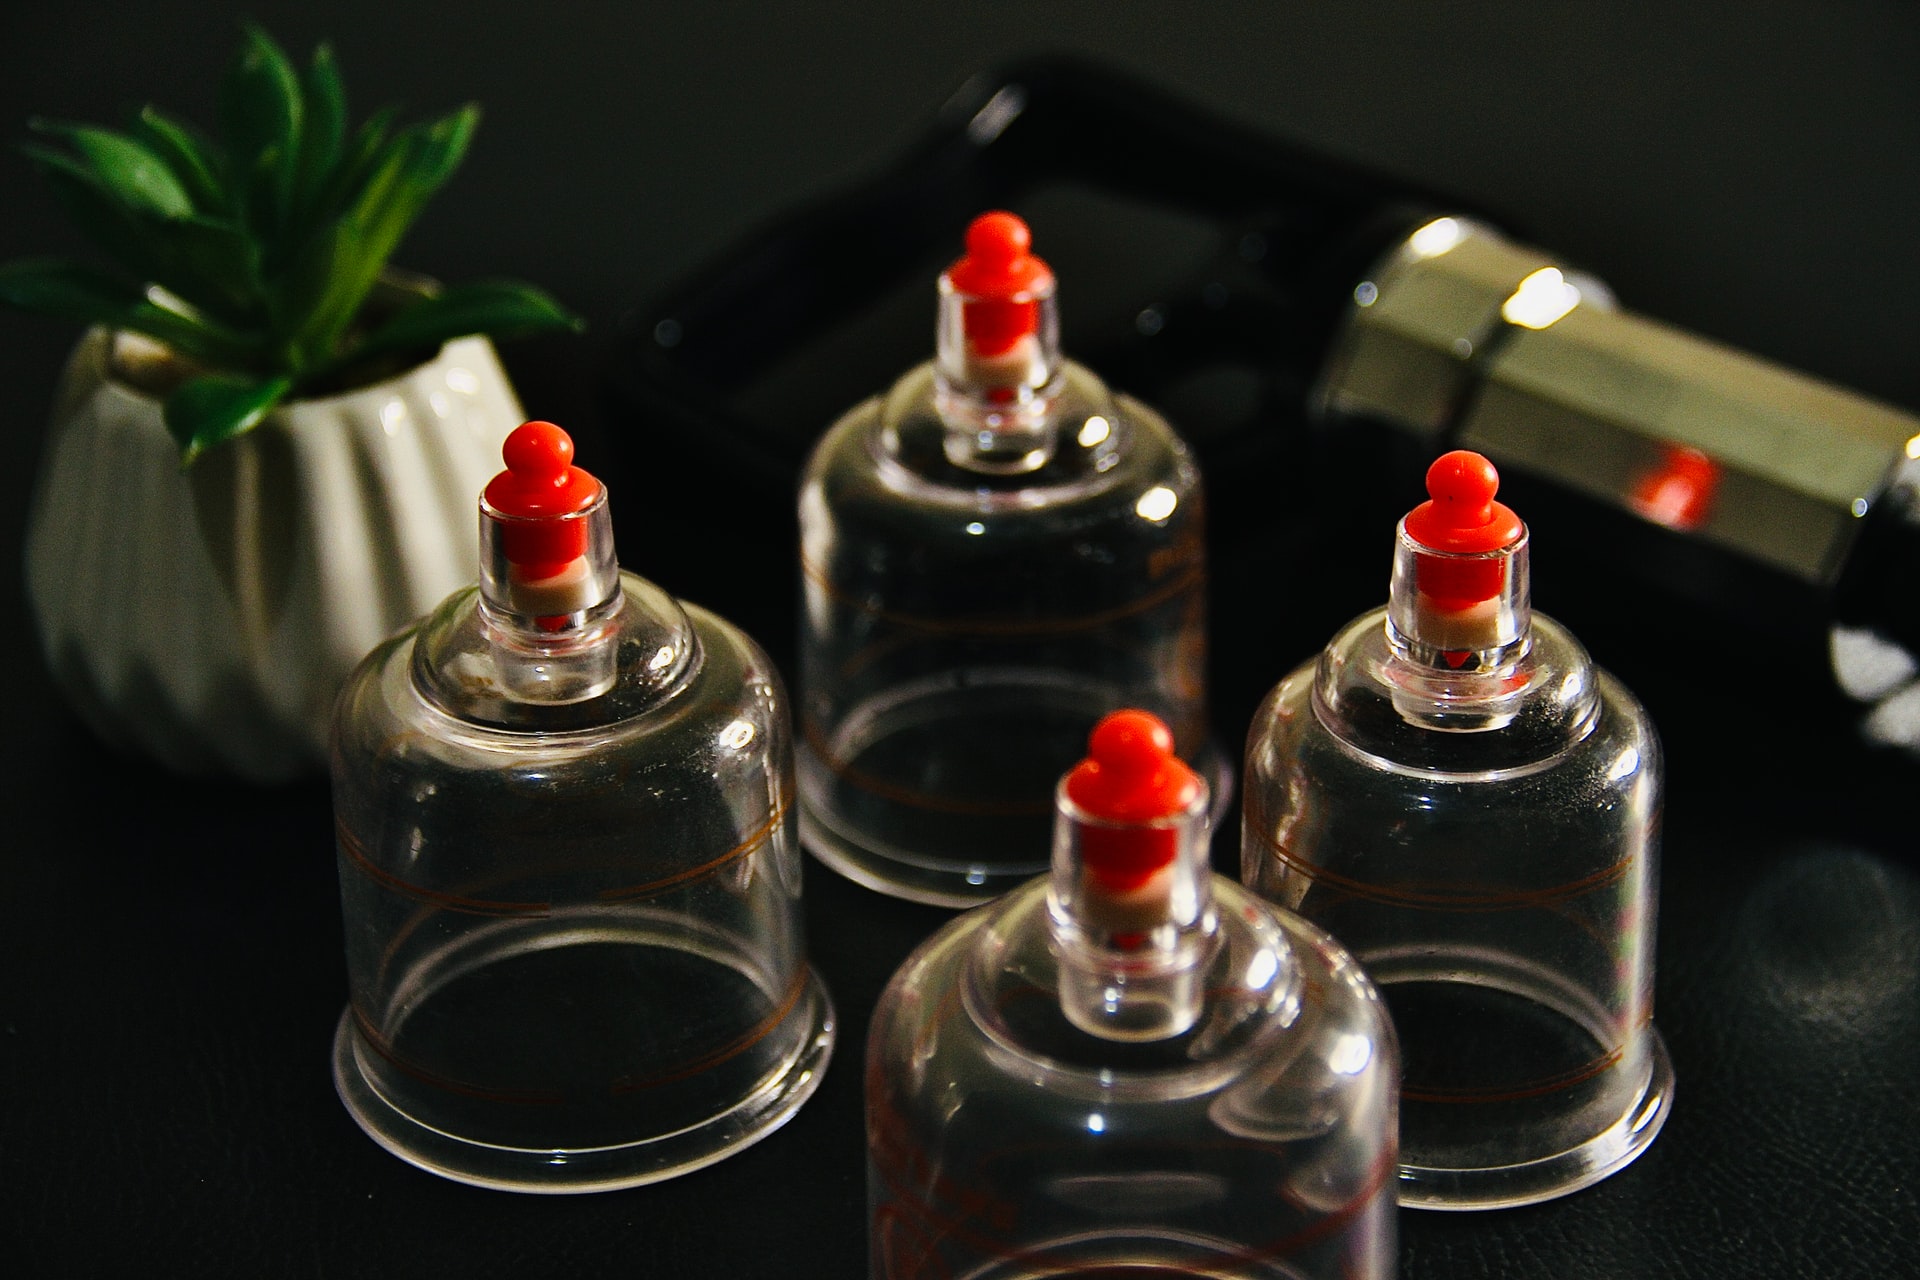 The world of erotic cupping